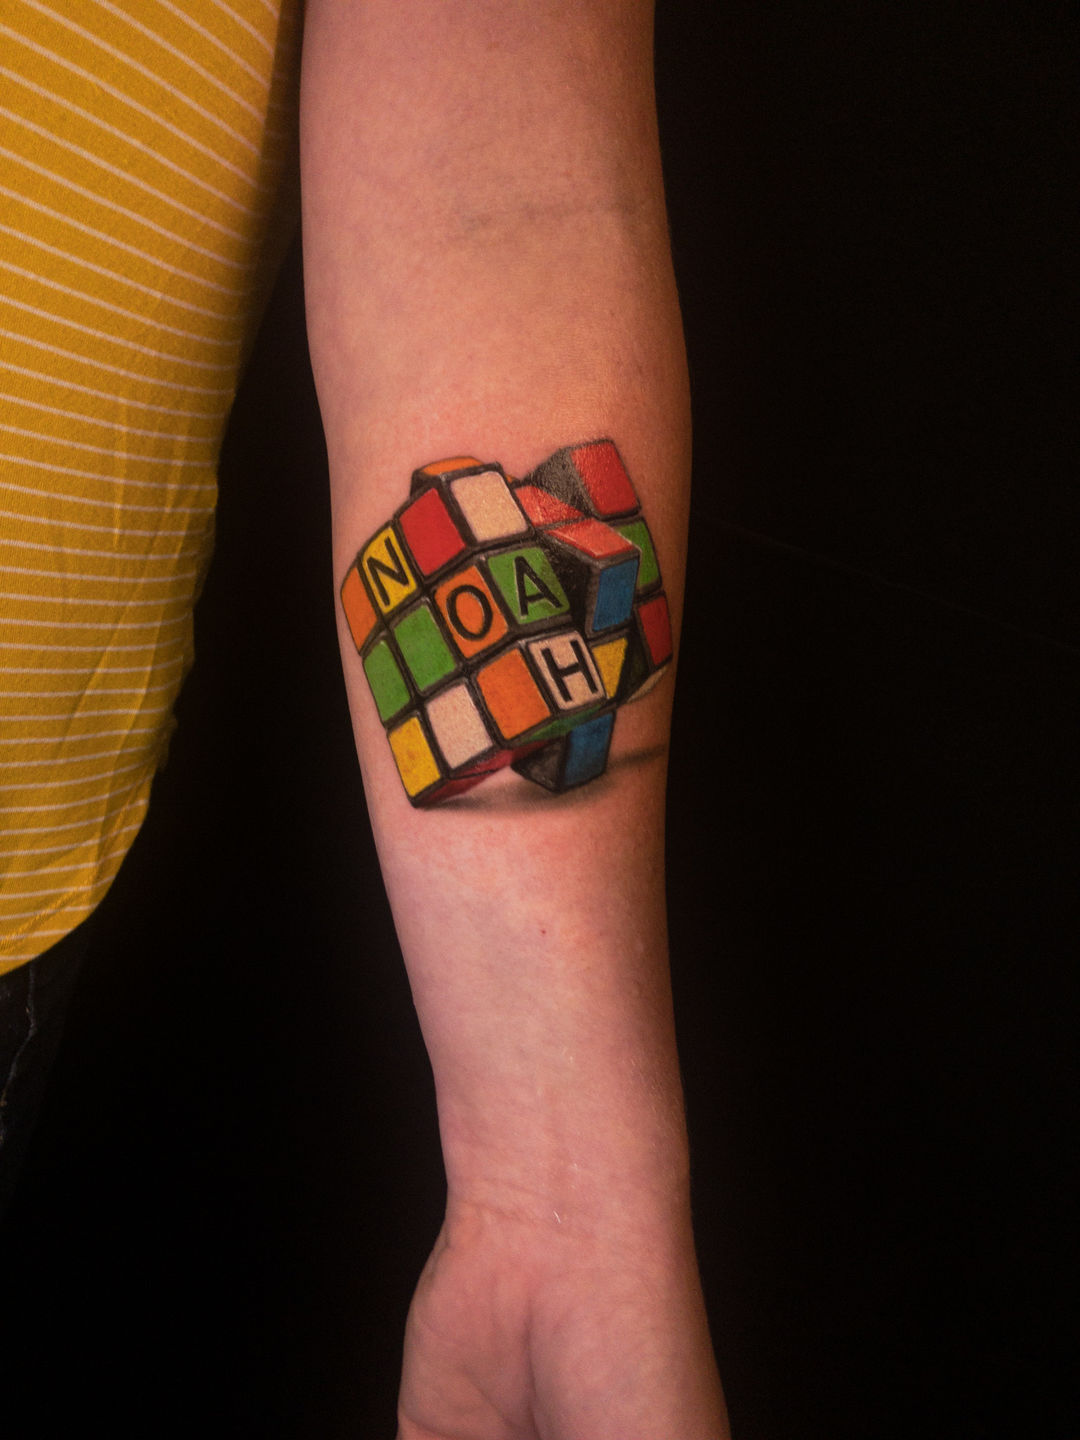 60 Wonderful Autism Tattoo Ideas  Showing Awareness and Honor